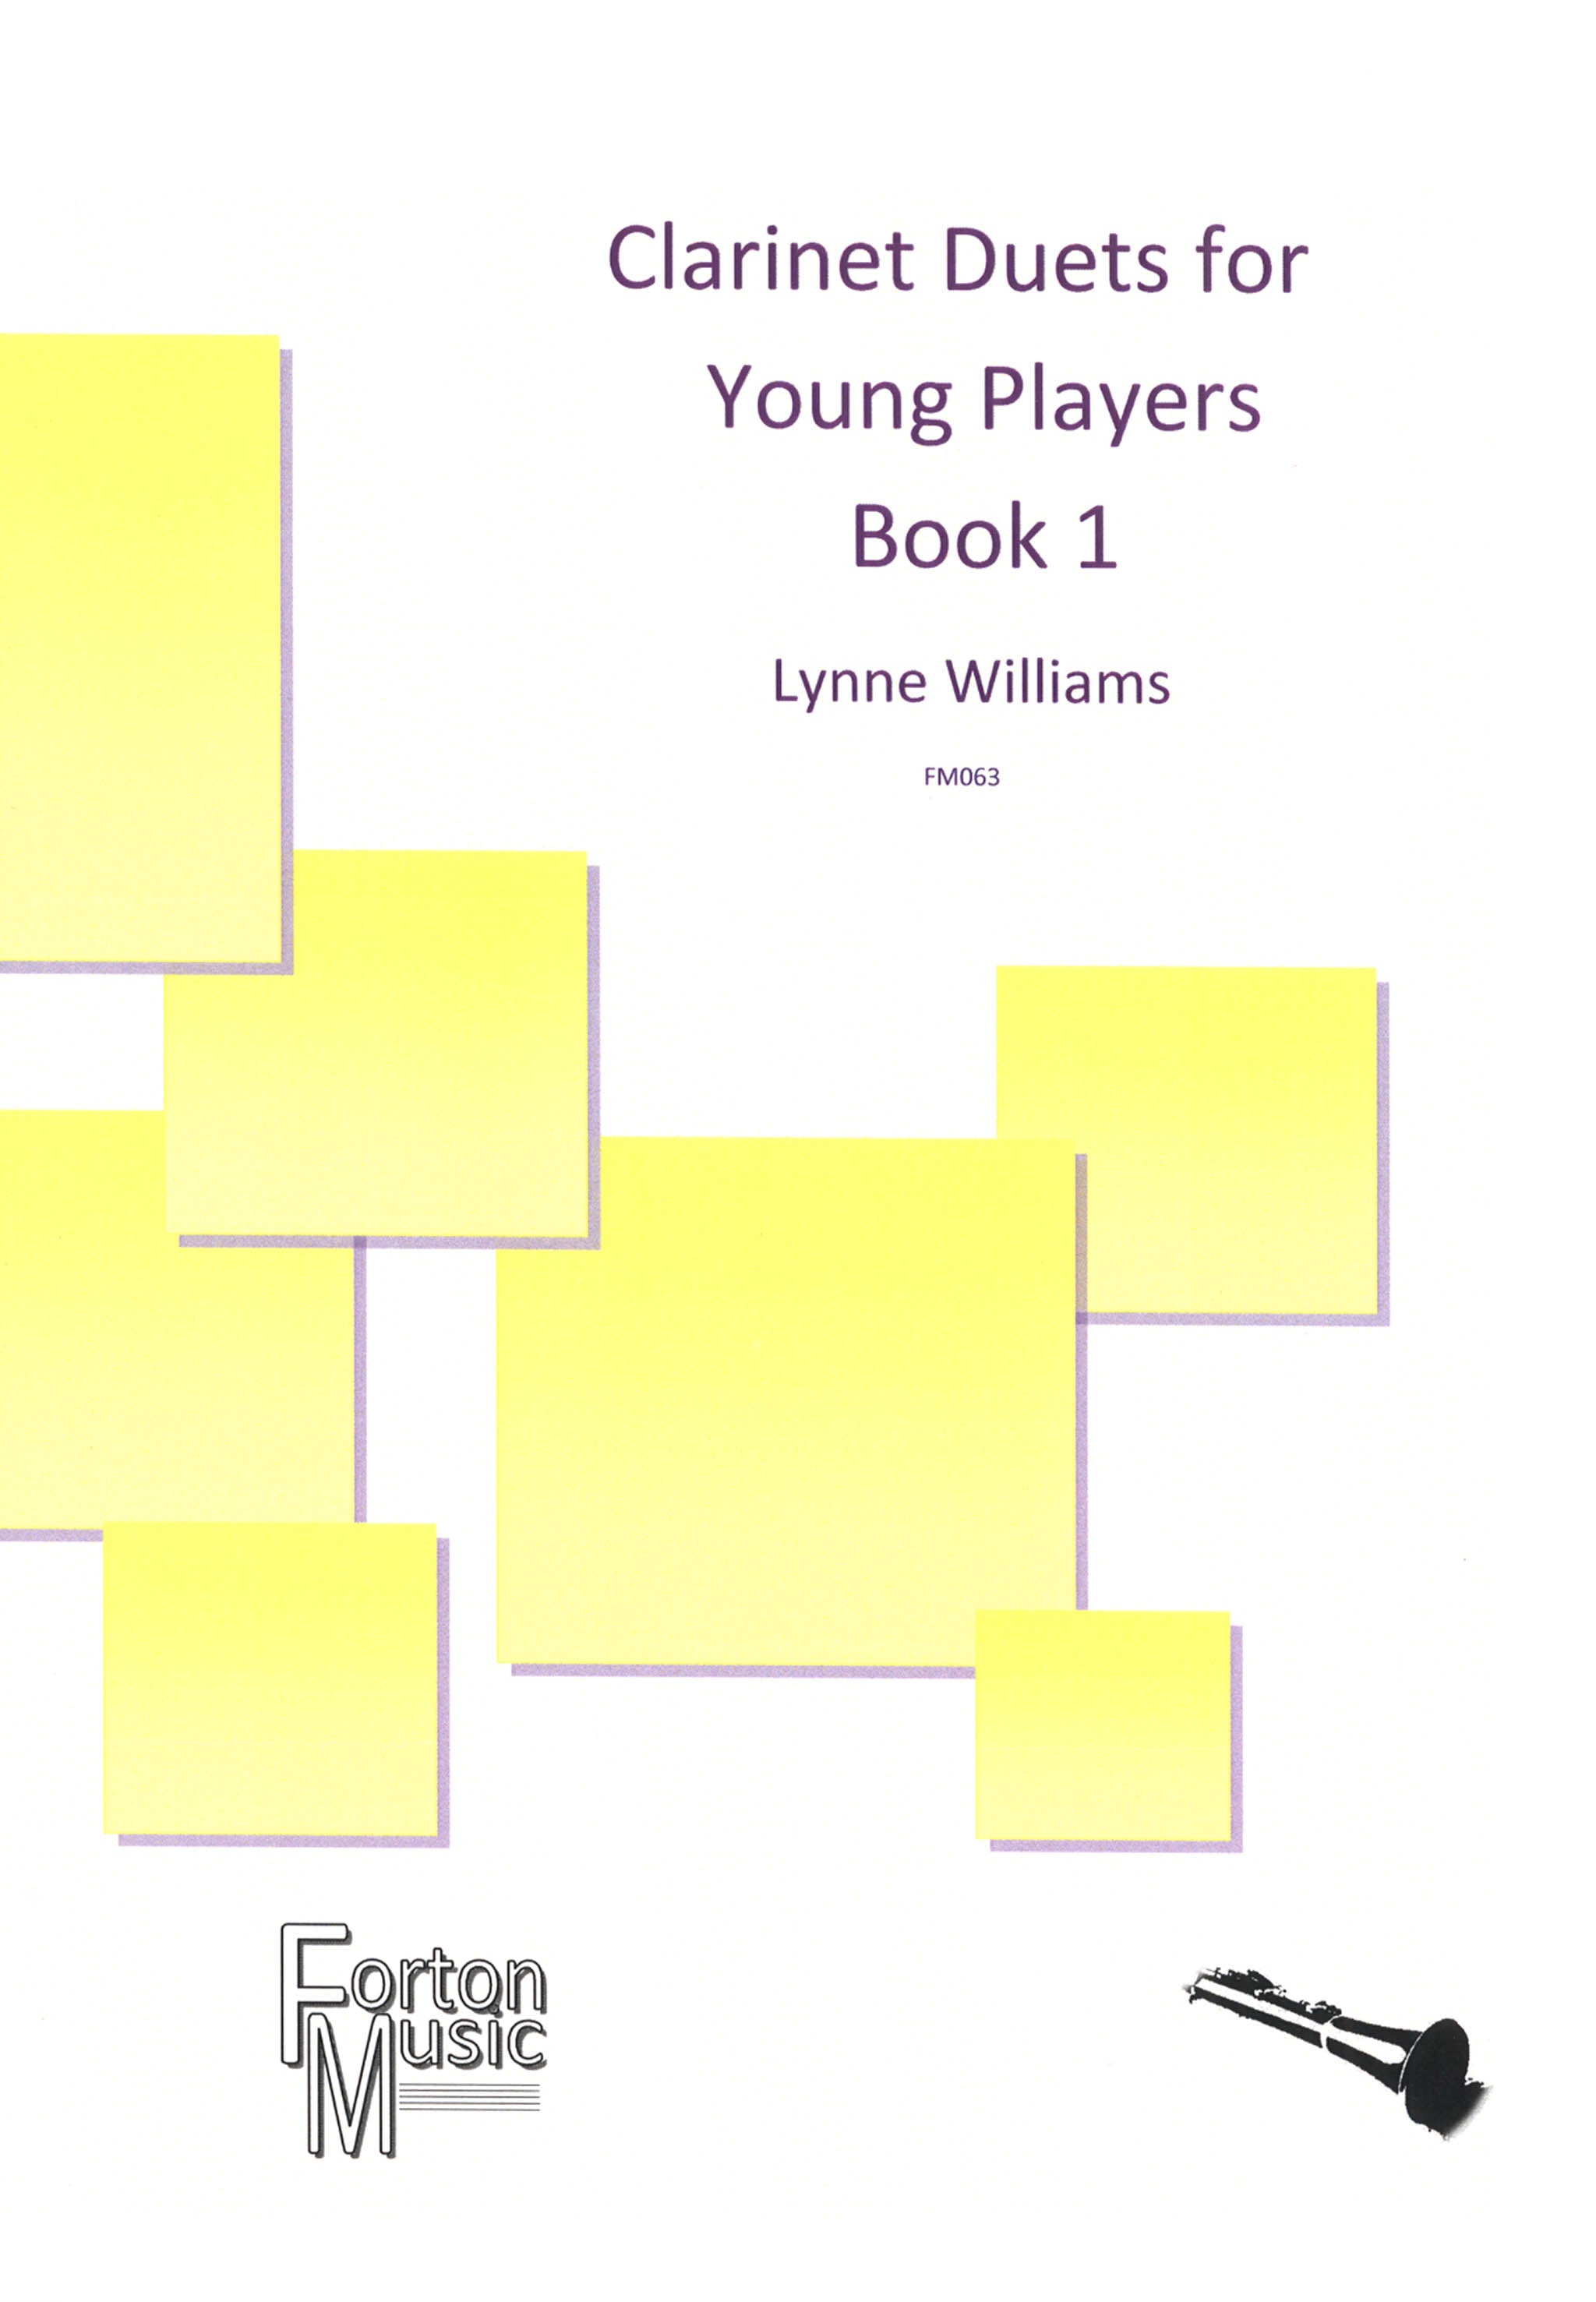 Clarinet Duets for Young Players, Book 1 Cover